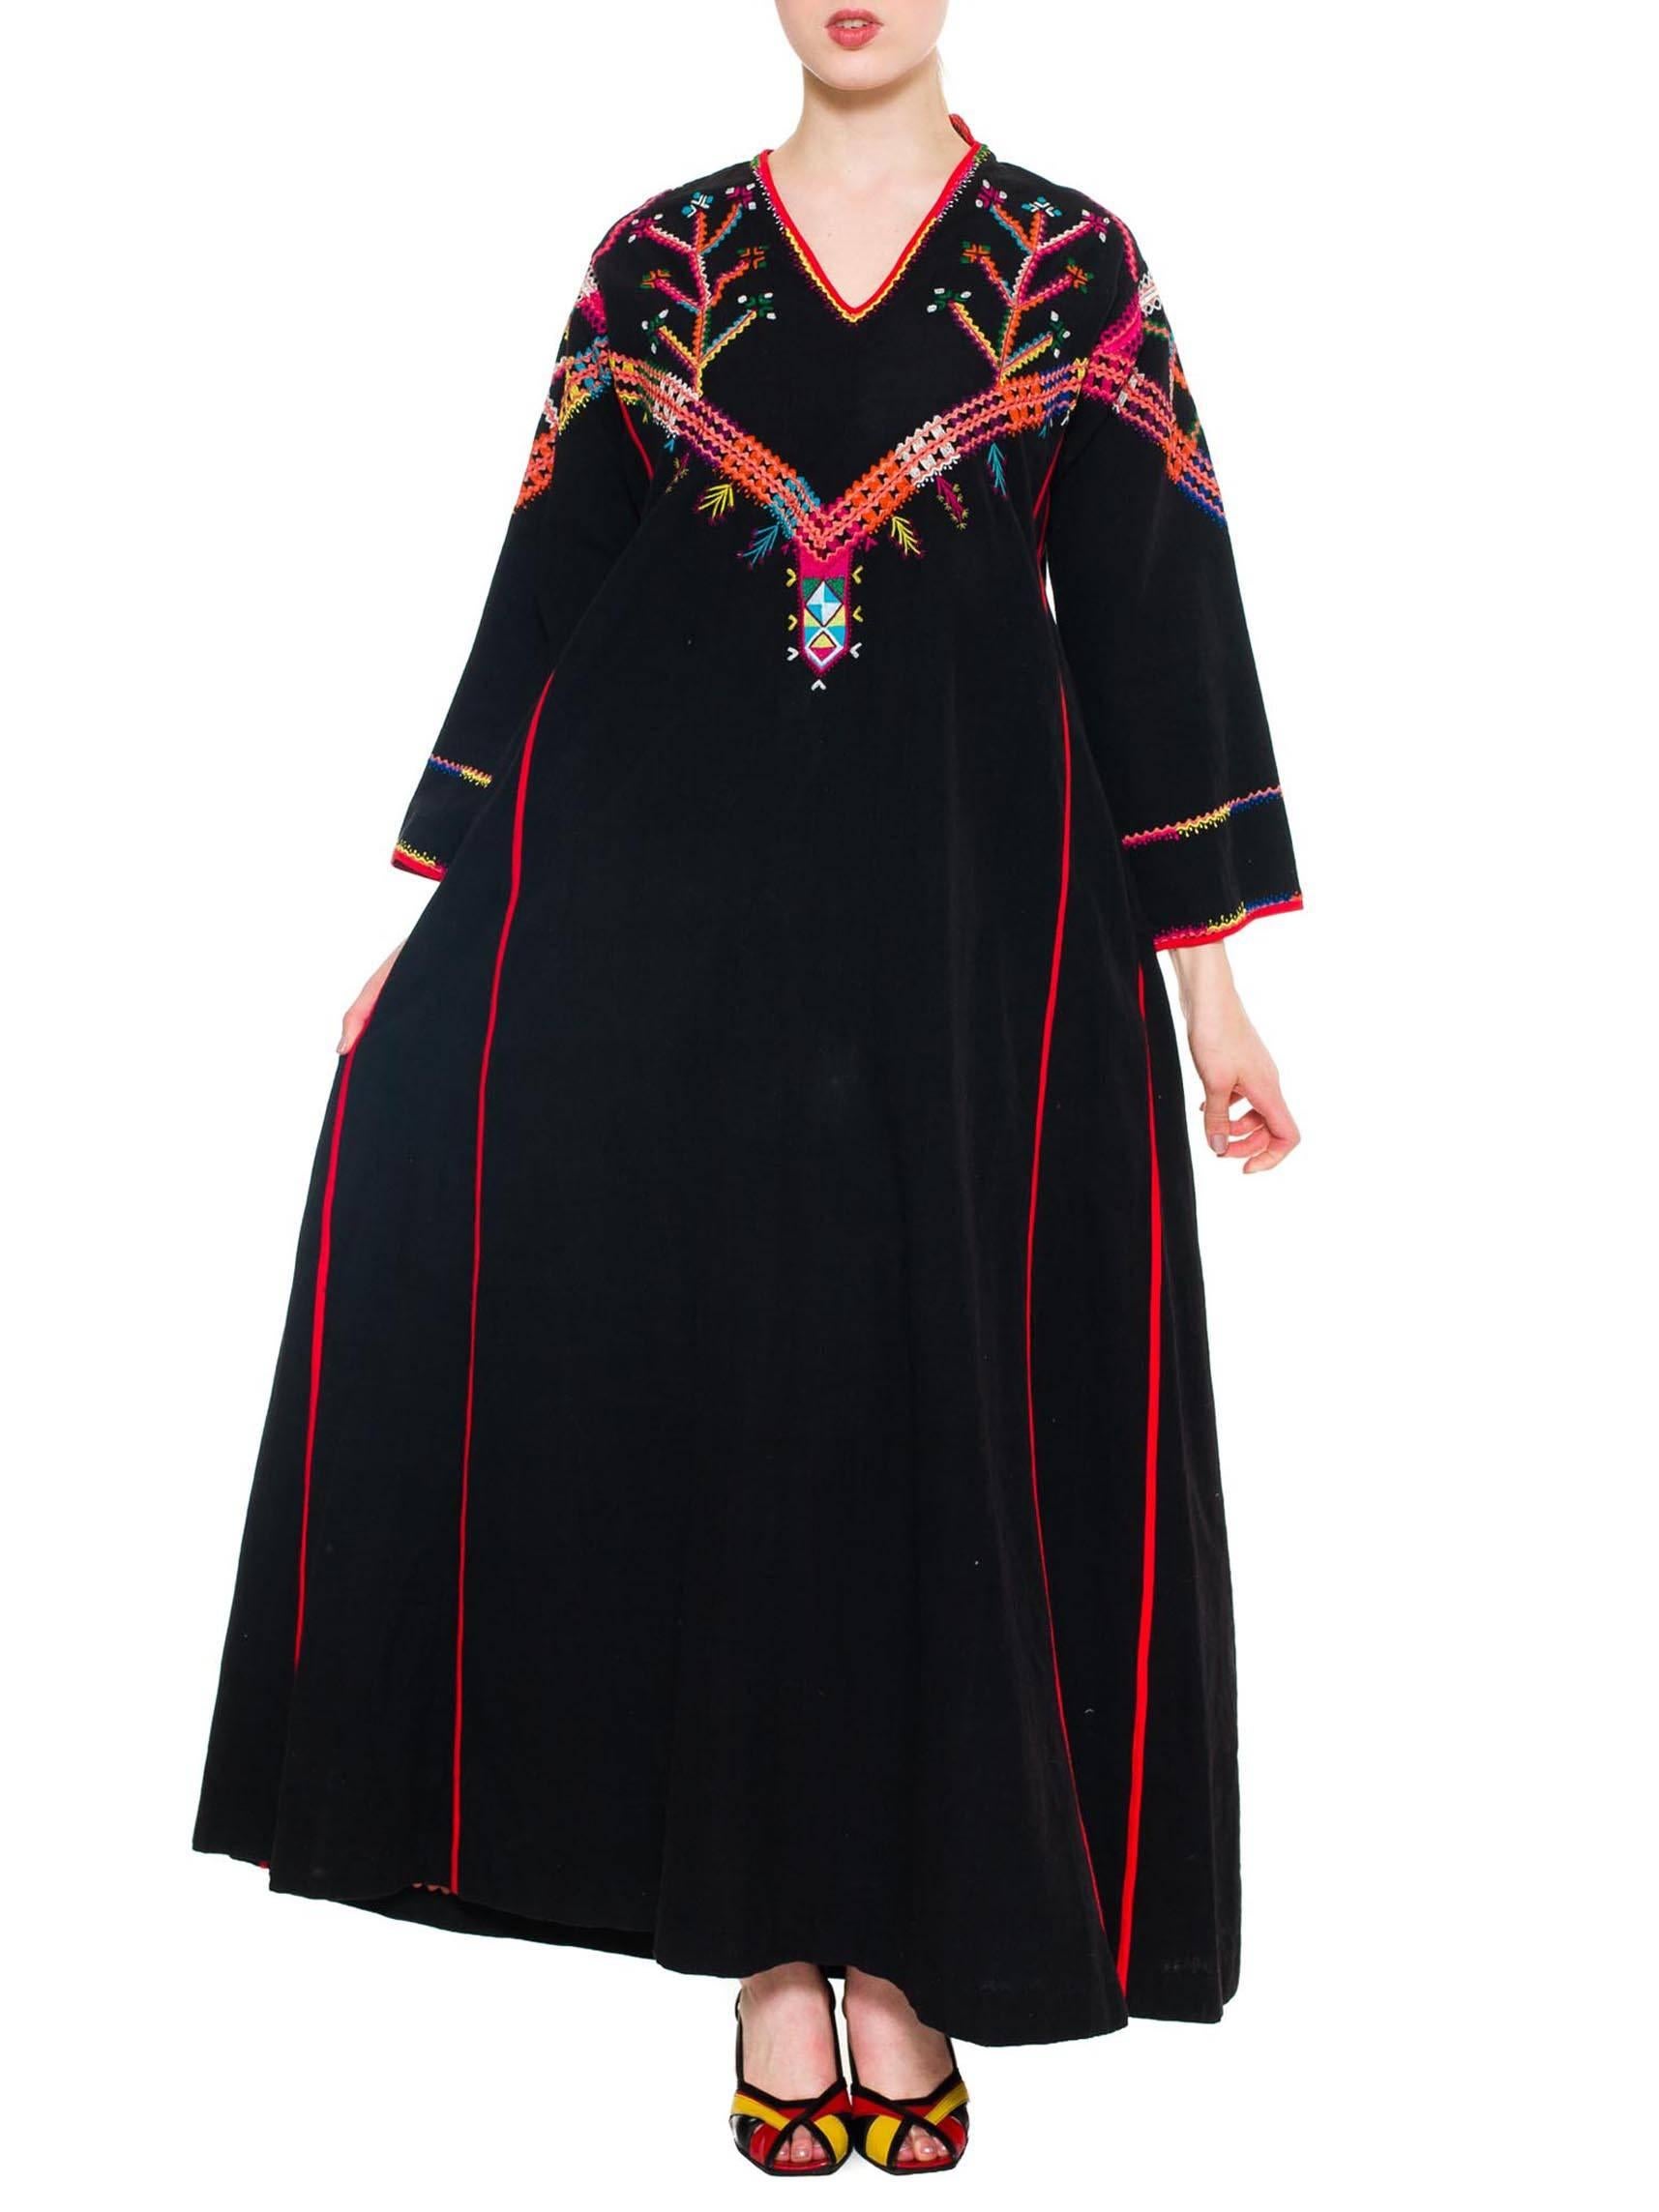 1960S Black Multicolored Powerful Long Embroidered Cloak Kaftan
MORPHEW COLLECTION is made entirely by hand in our NYC Ateliér of rare antique materials sourced from around the globe. Our sustainable vintage materials represent over a century of